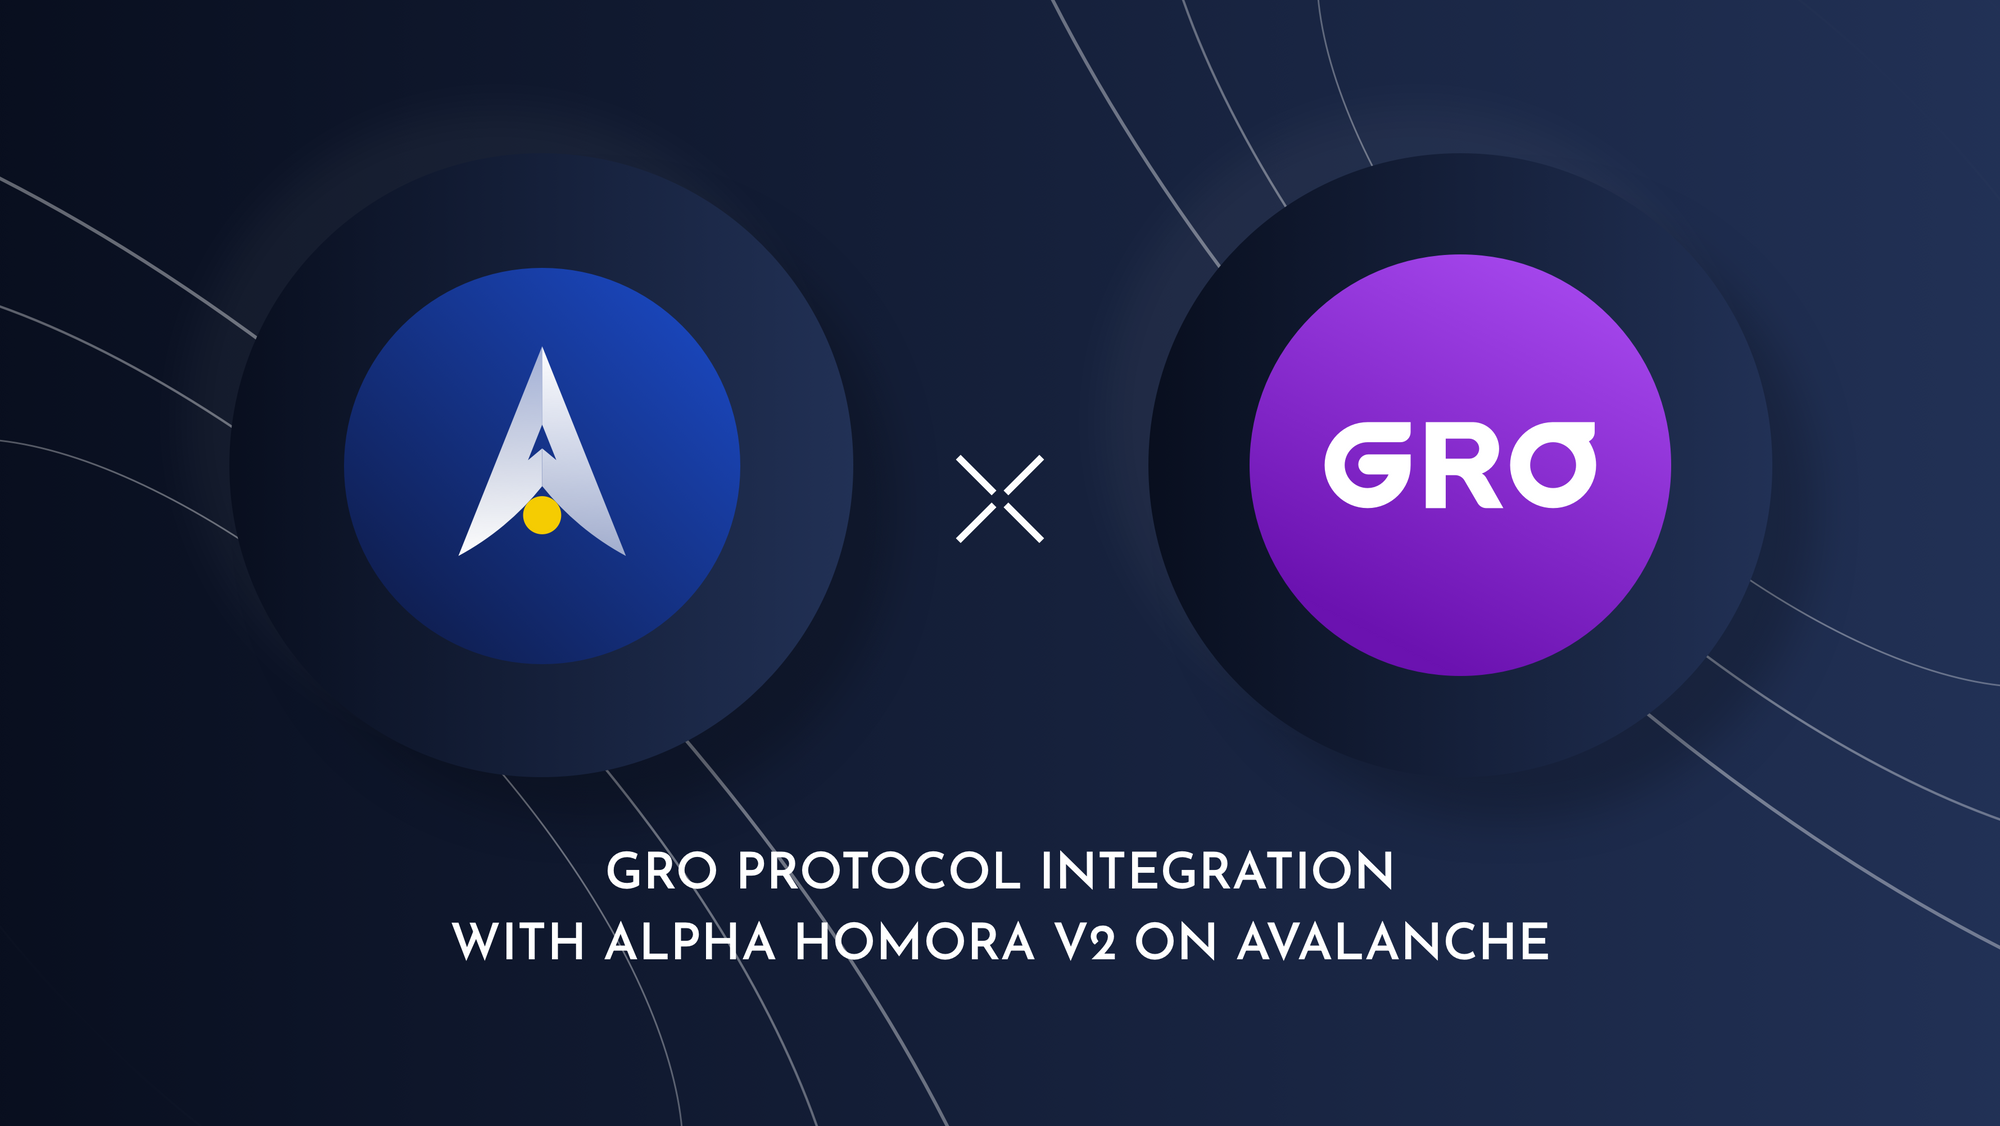 Alpha Homora V2 Avalanche First Product Integration with GRO Protocol